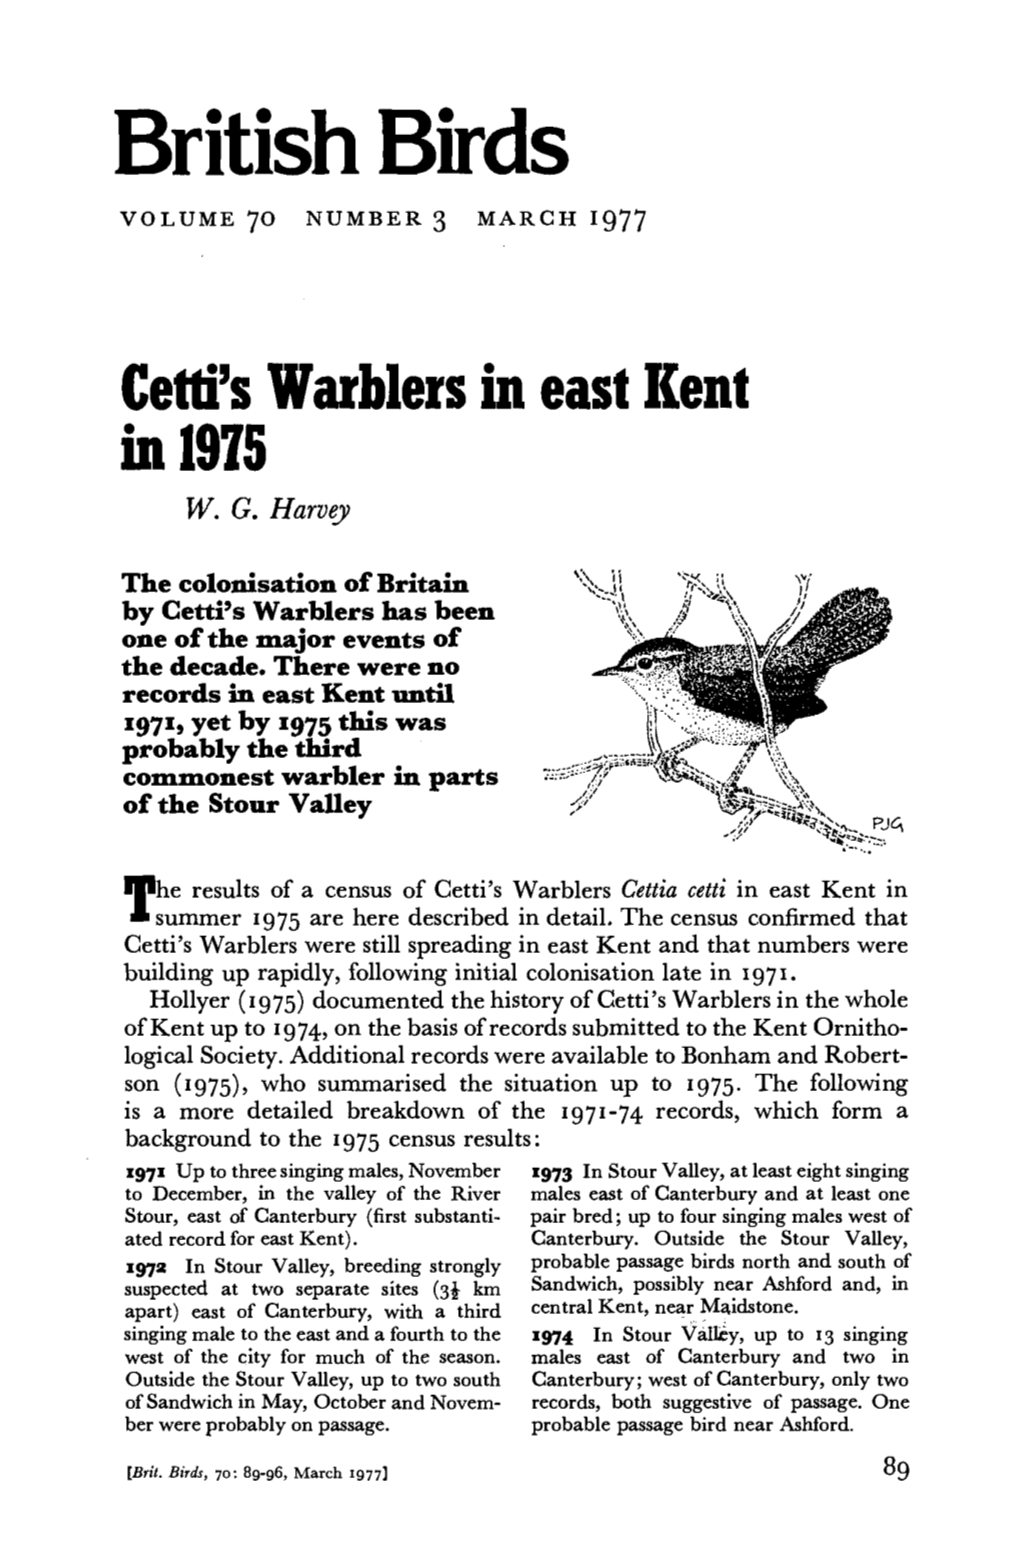 Cetti's Warblers in East Kent in 1975 W